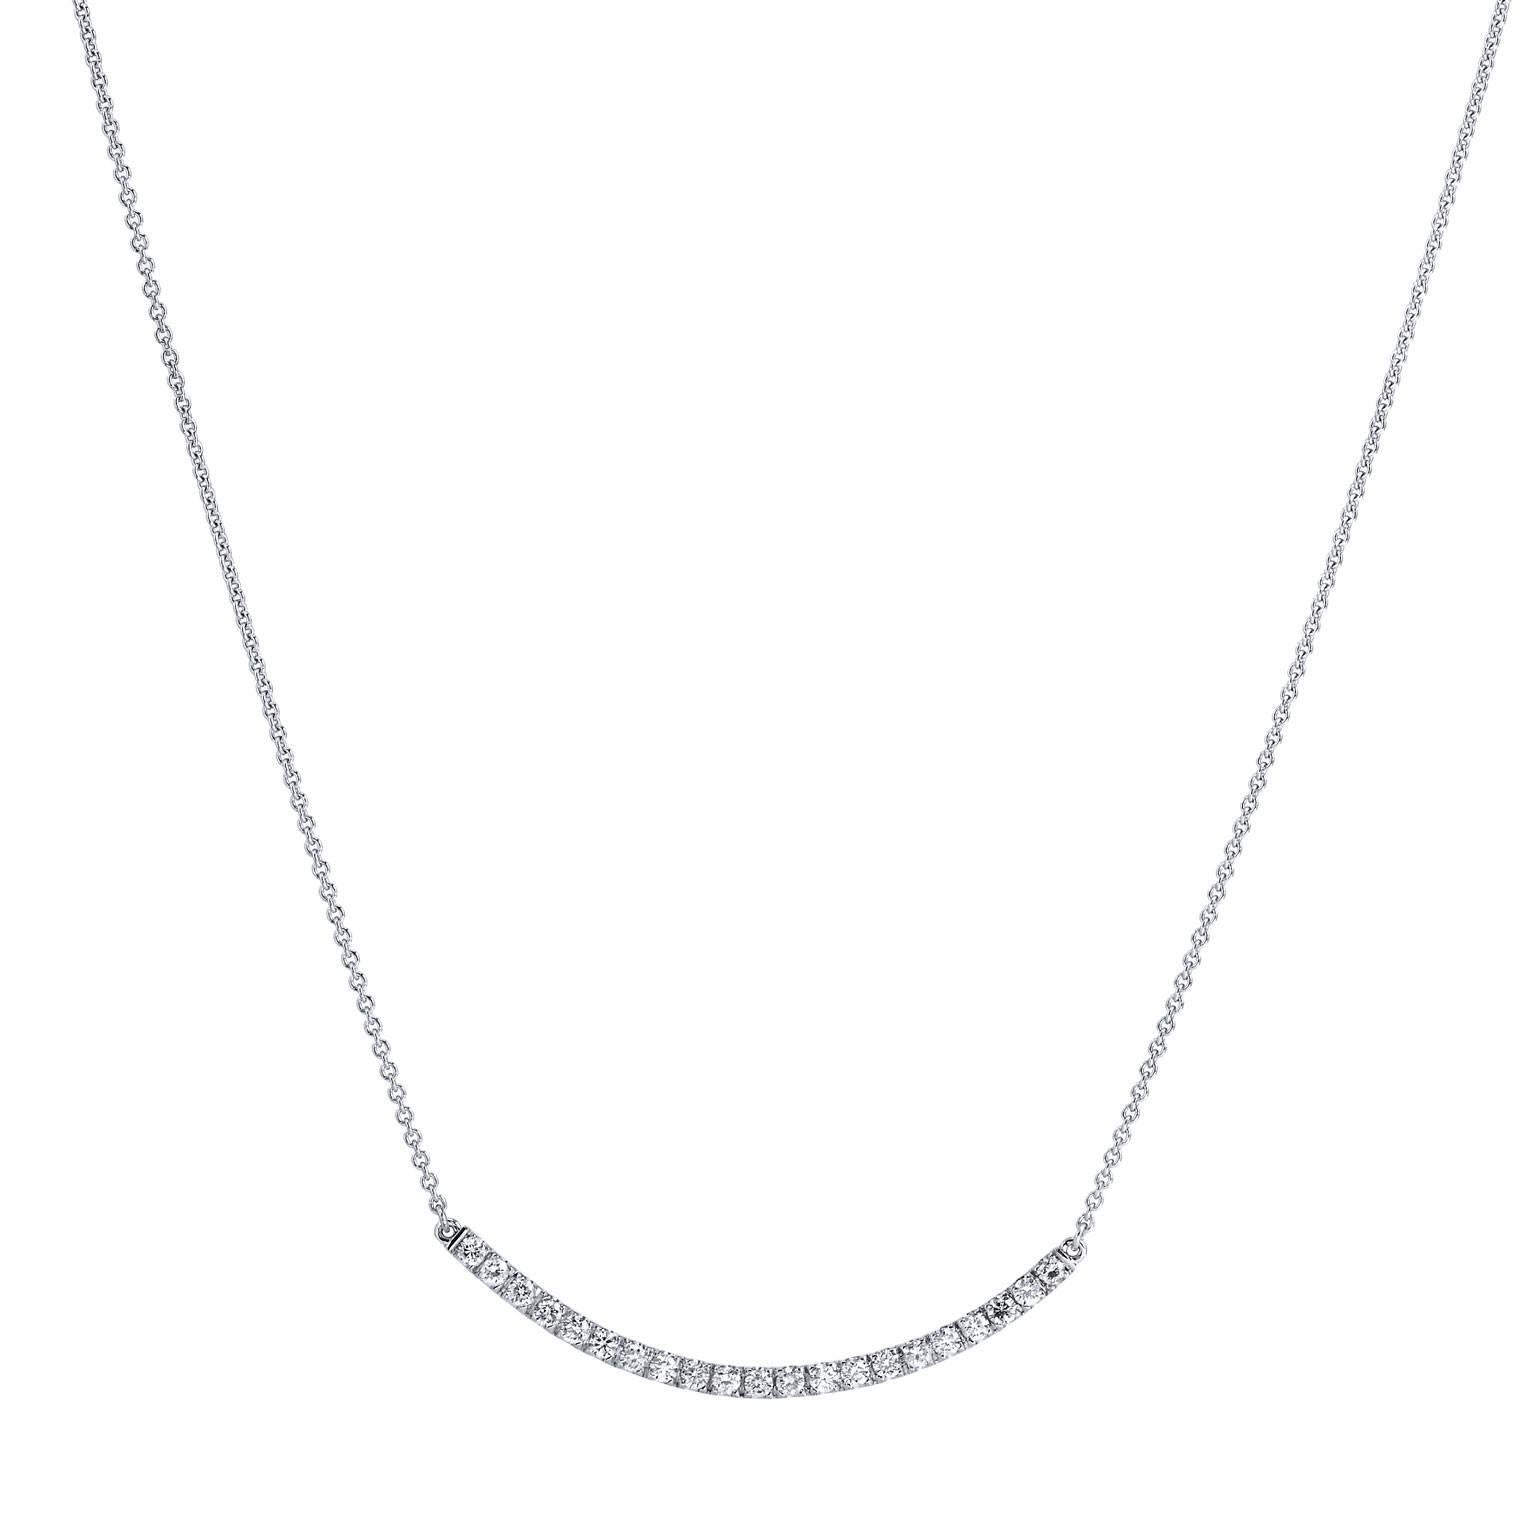 This glittering handmade H and H 18 karat white gold pendant features twenty-one pieces of diamonds, with a total weight of 0.72 carat (E/F/SI1/SI2), set in a four prong setting. This pendant necklace will be a piece that she will cherish.